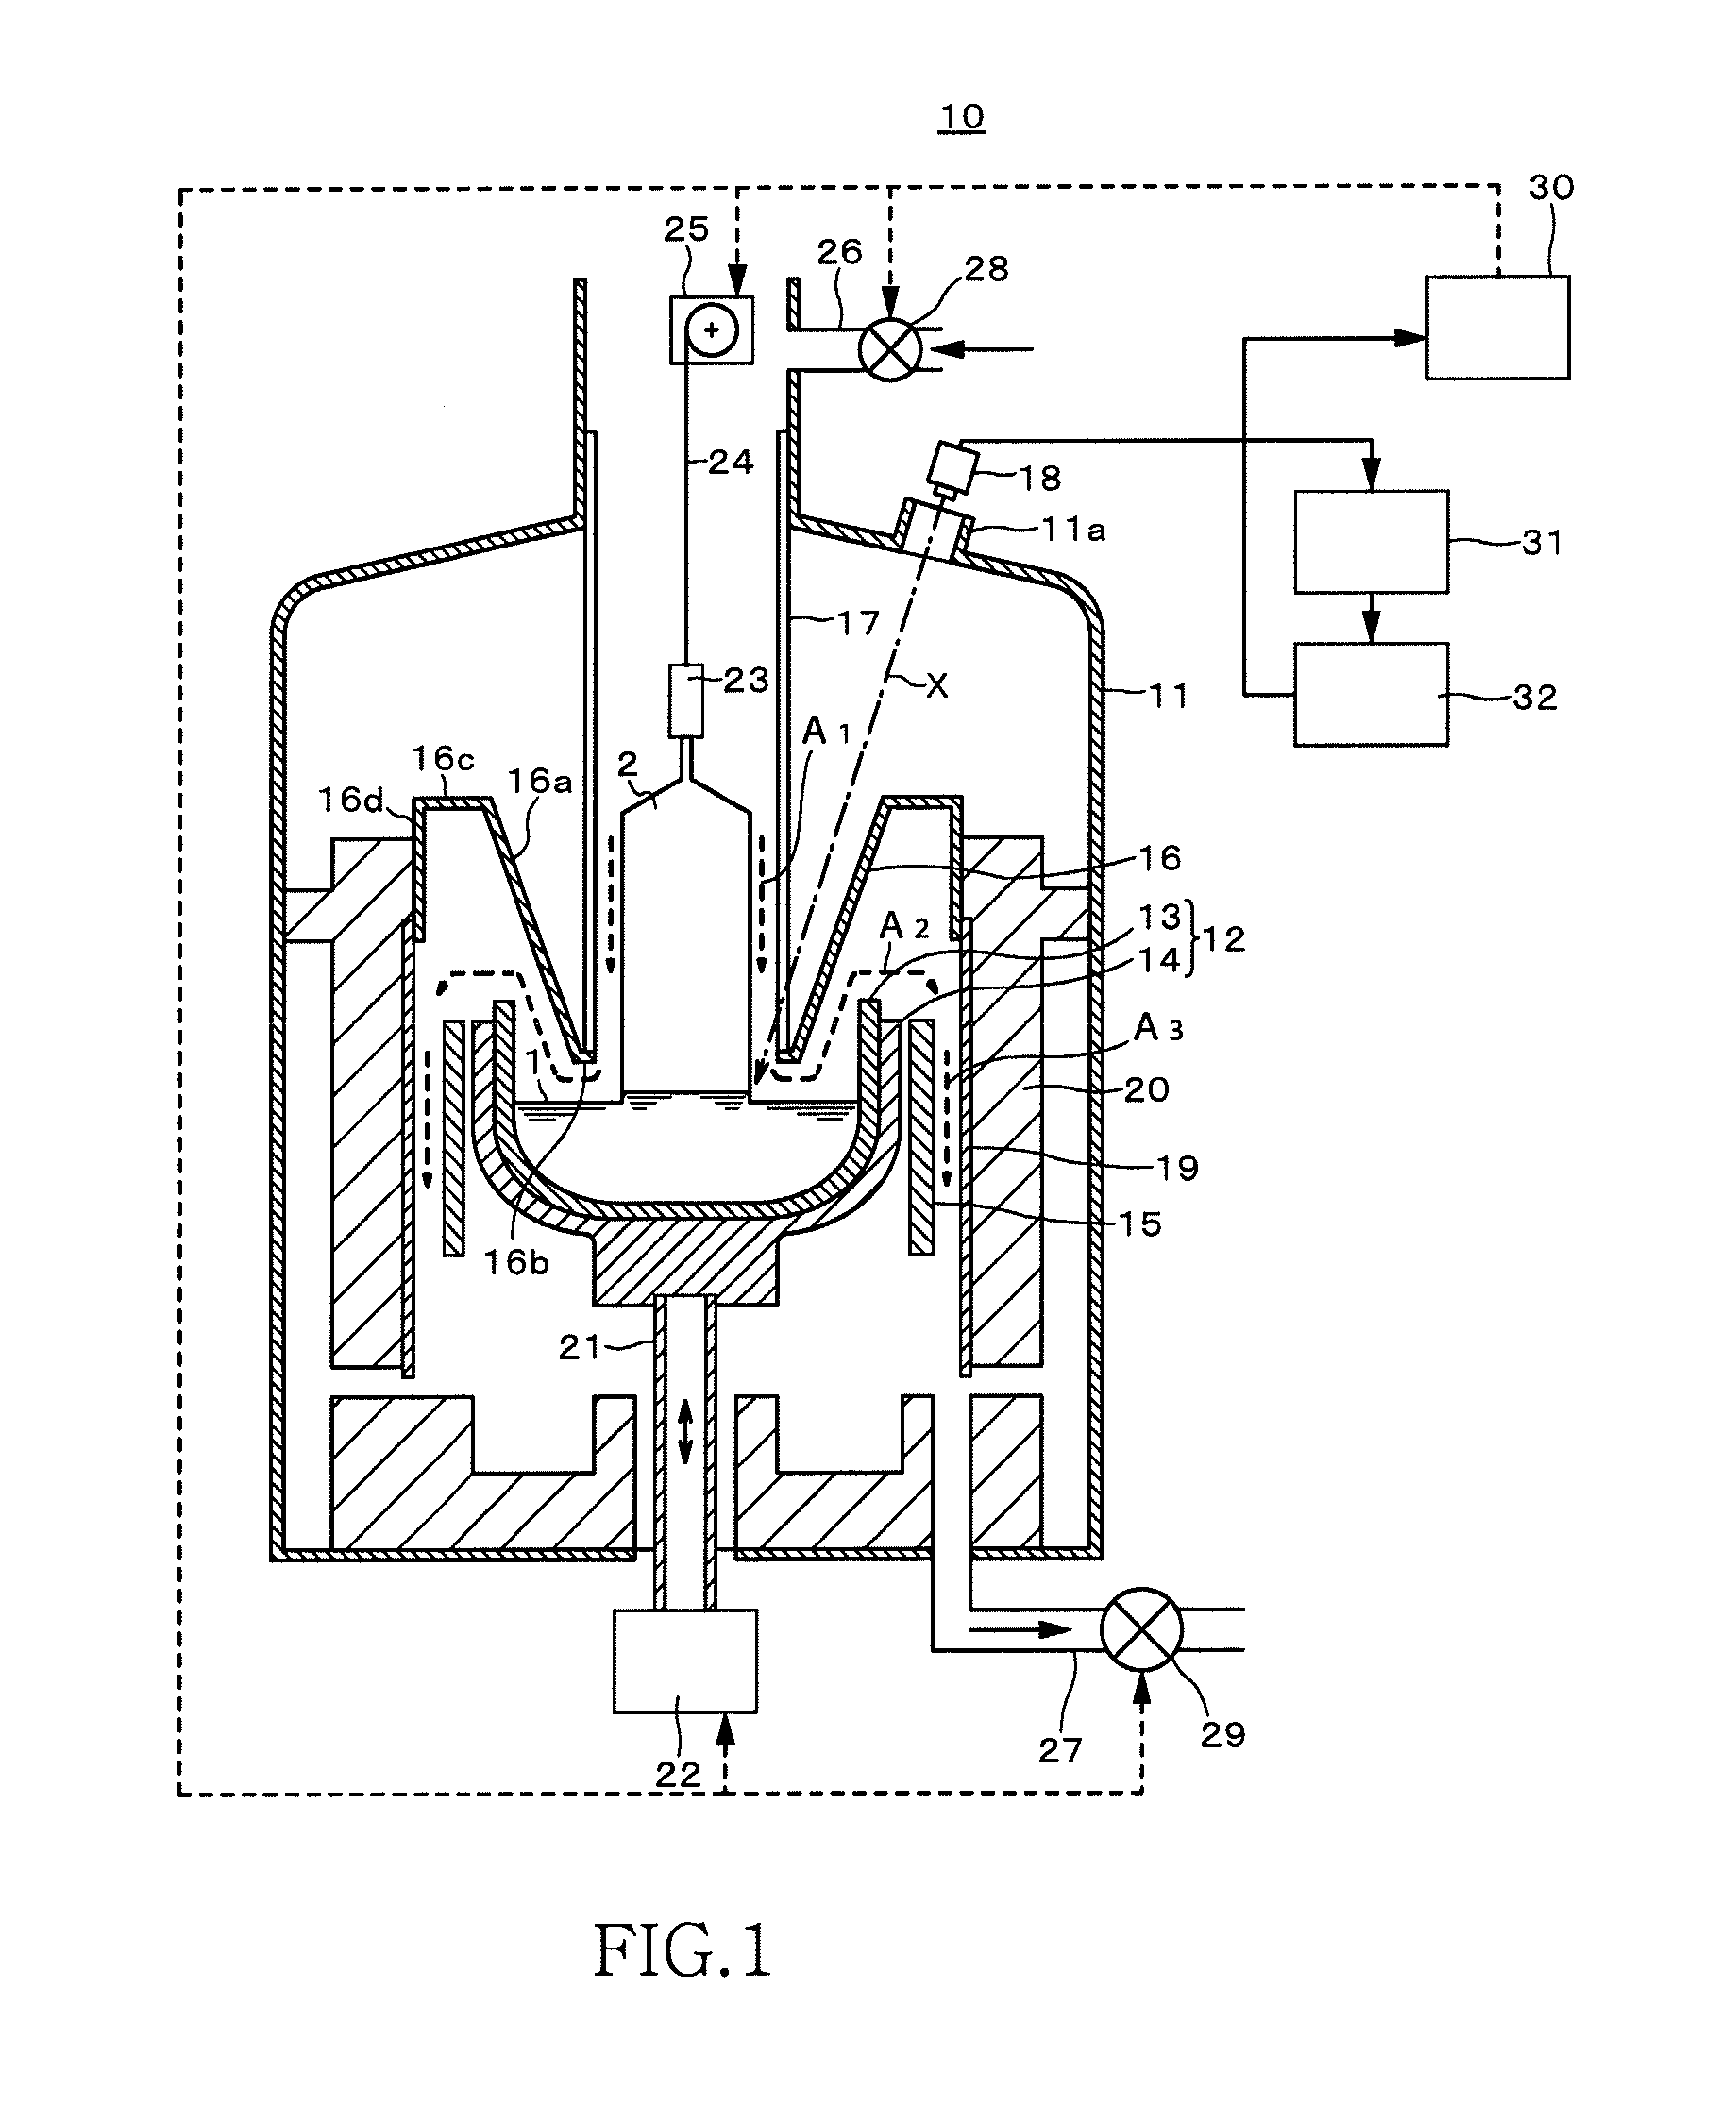 Silicon single crystal pull-up apparatus and method of manufacturing silicon single crystal